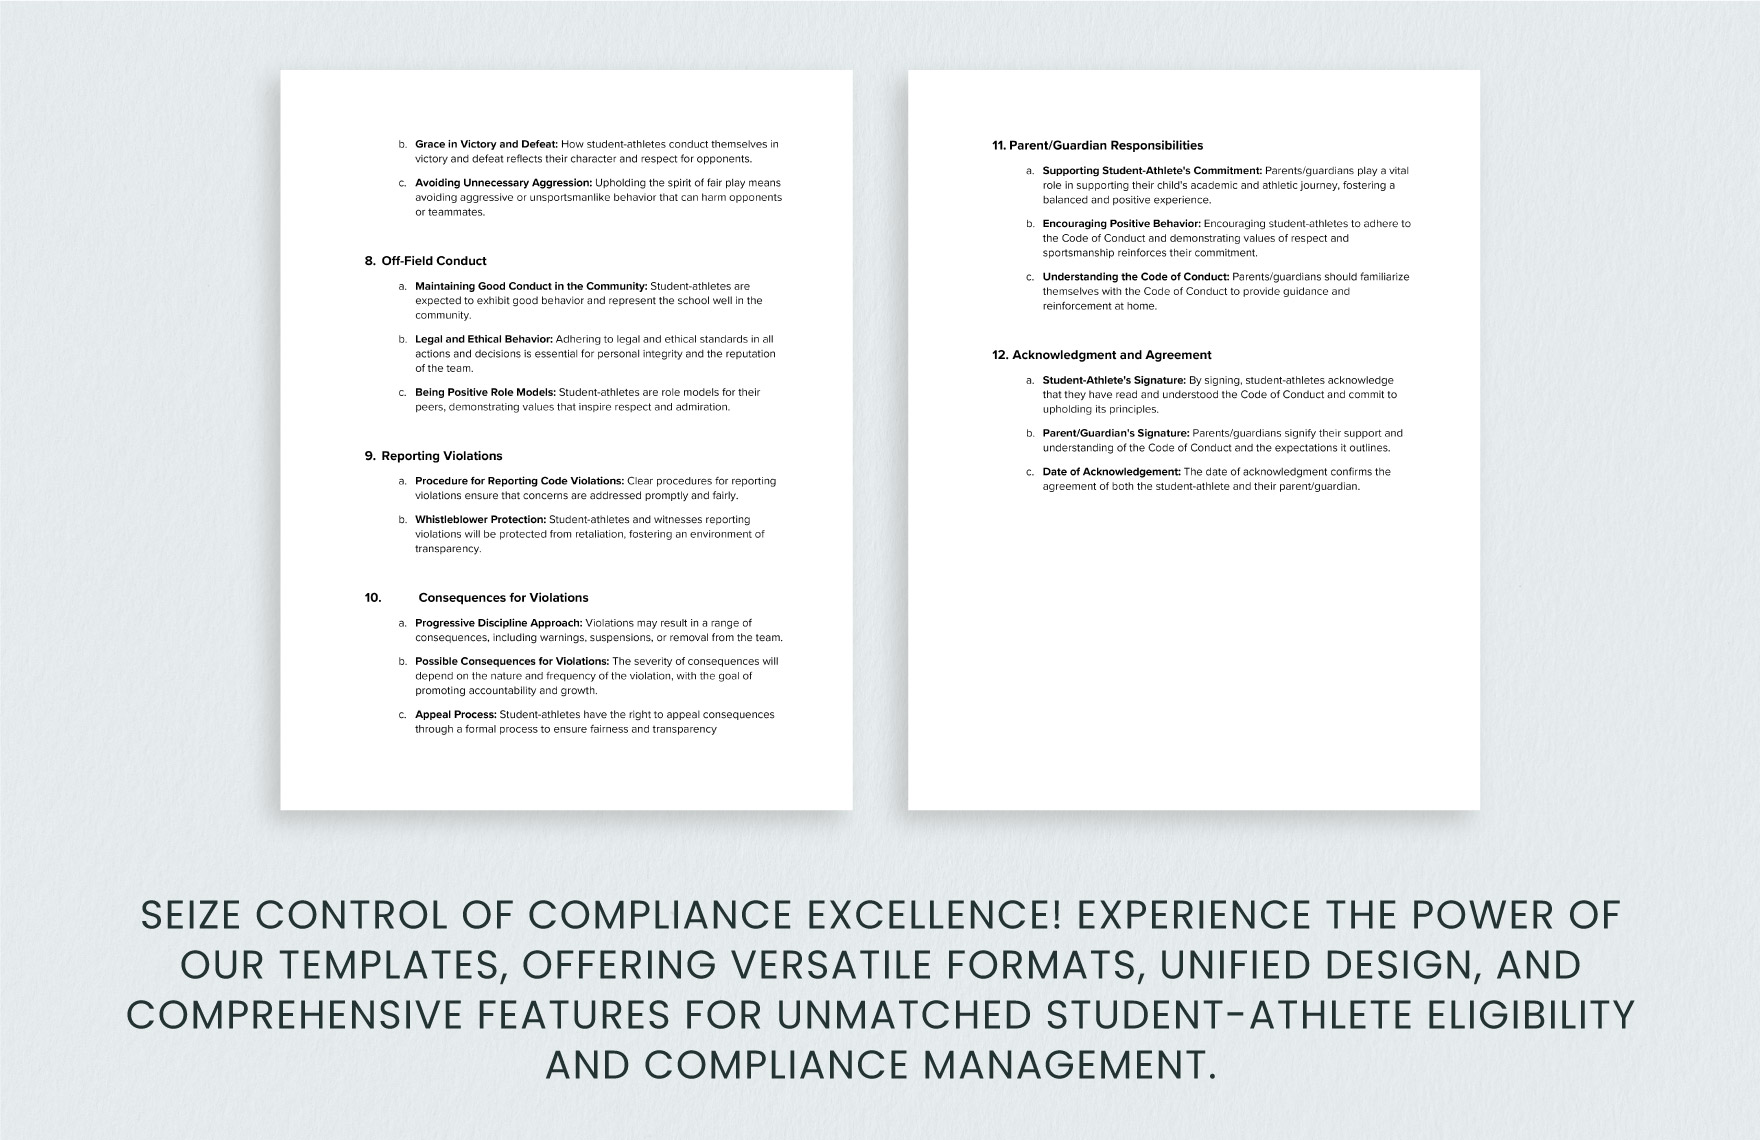 School Student-Athlete Code of Conduct Template